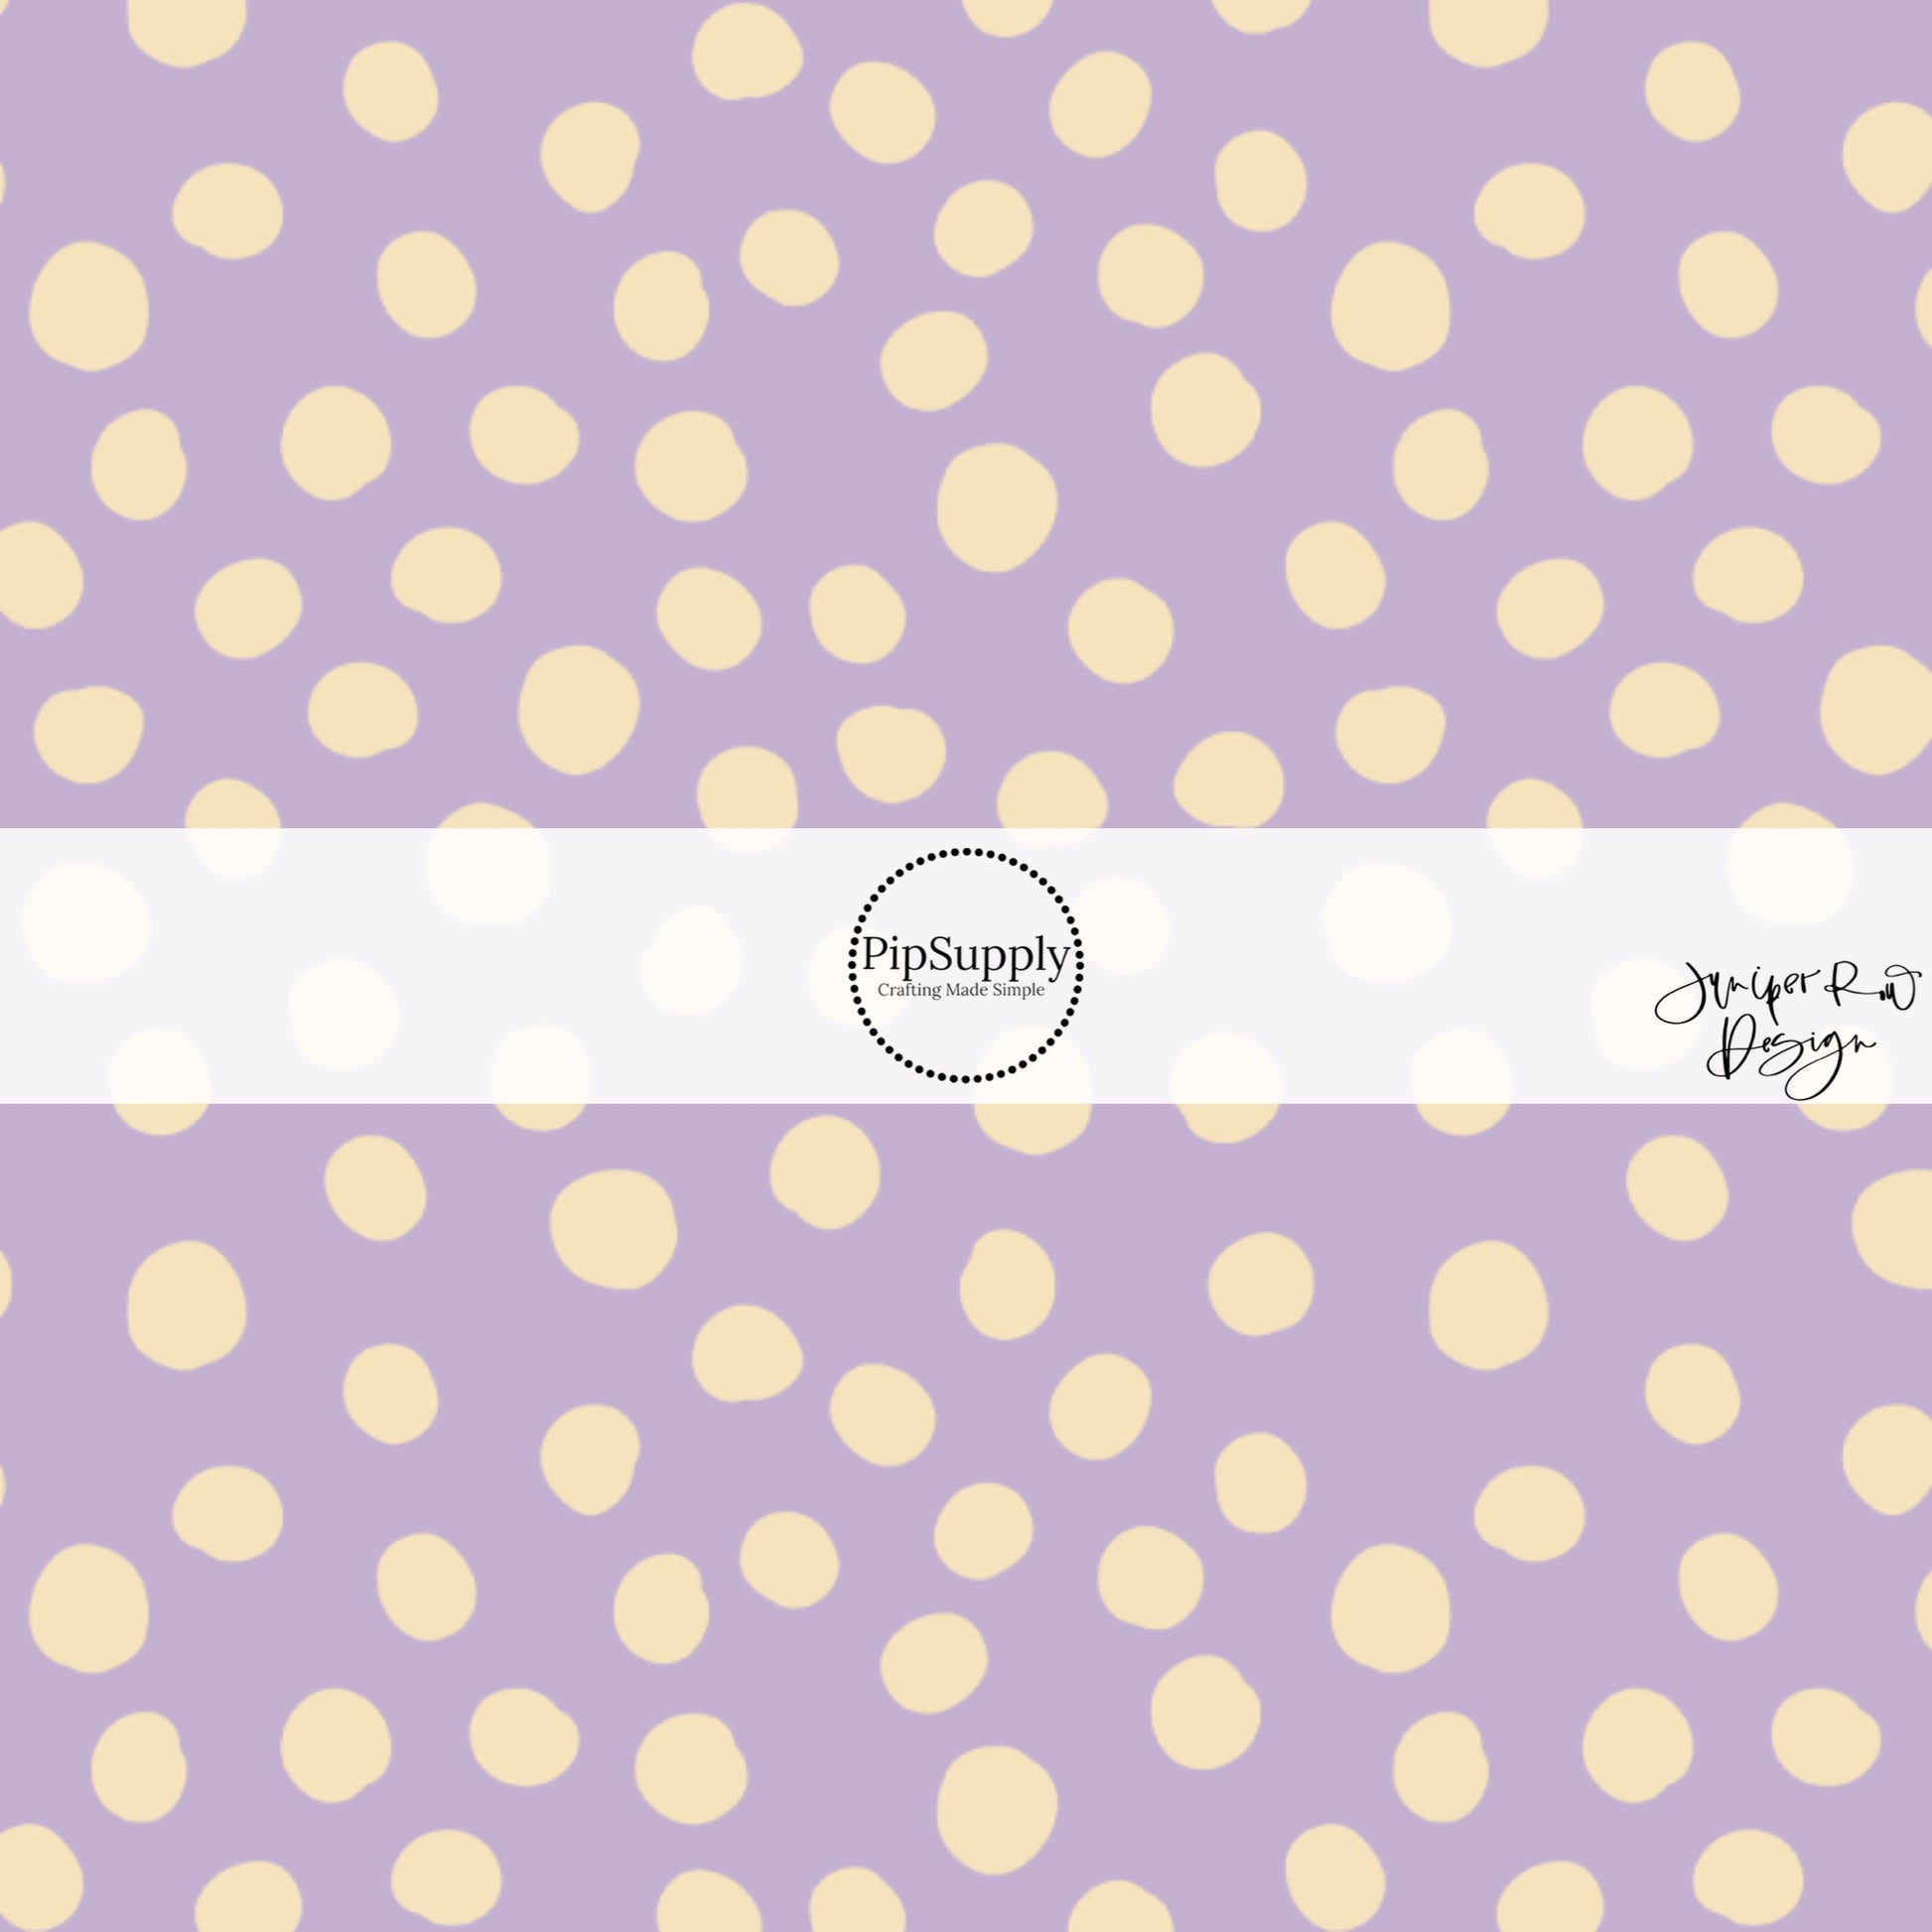 Seamless Polka Dot Background SVG Cut file by Creative Fabrica